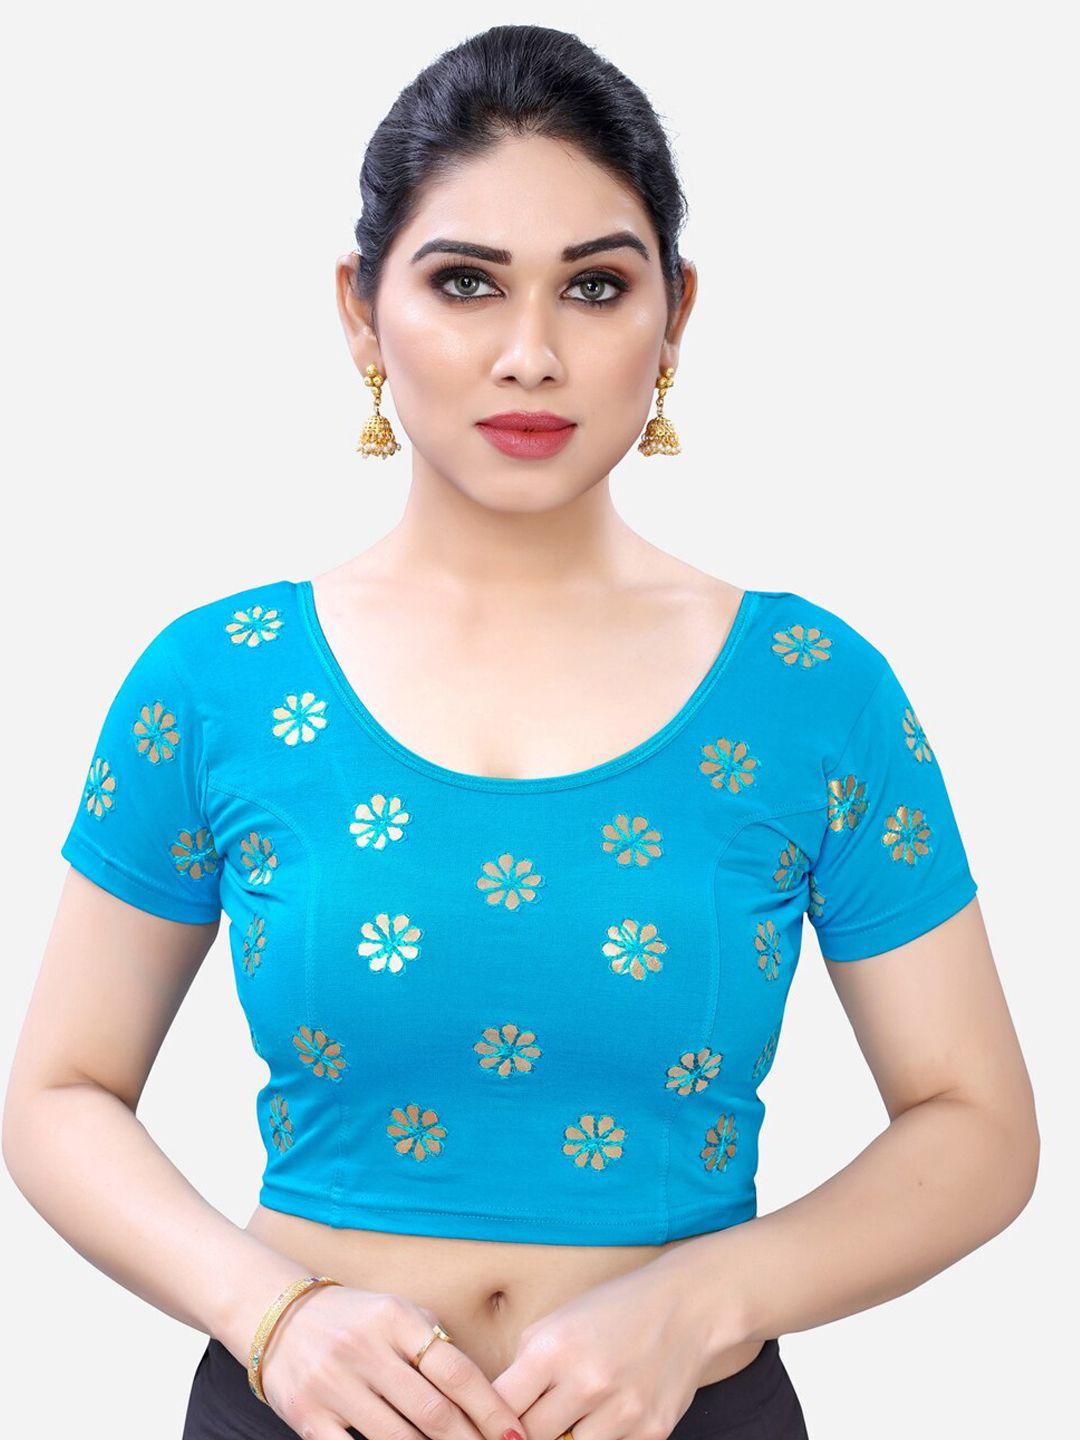 siril-blue-embroidered-saree-blouse